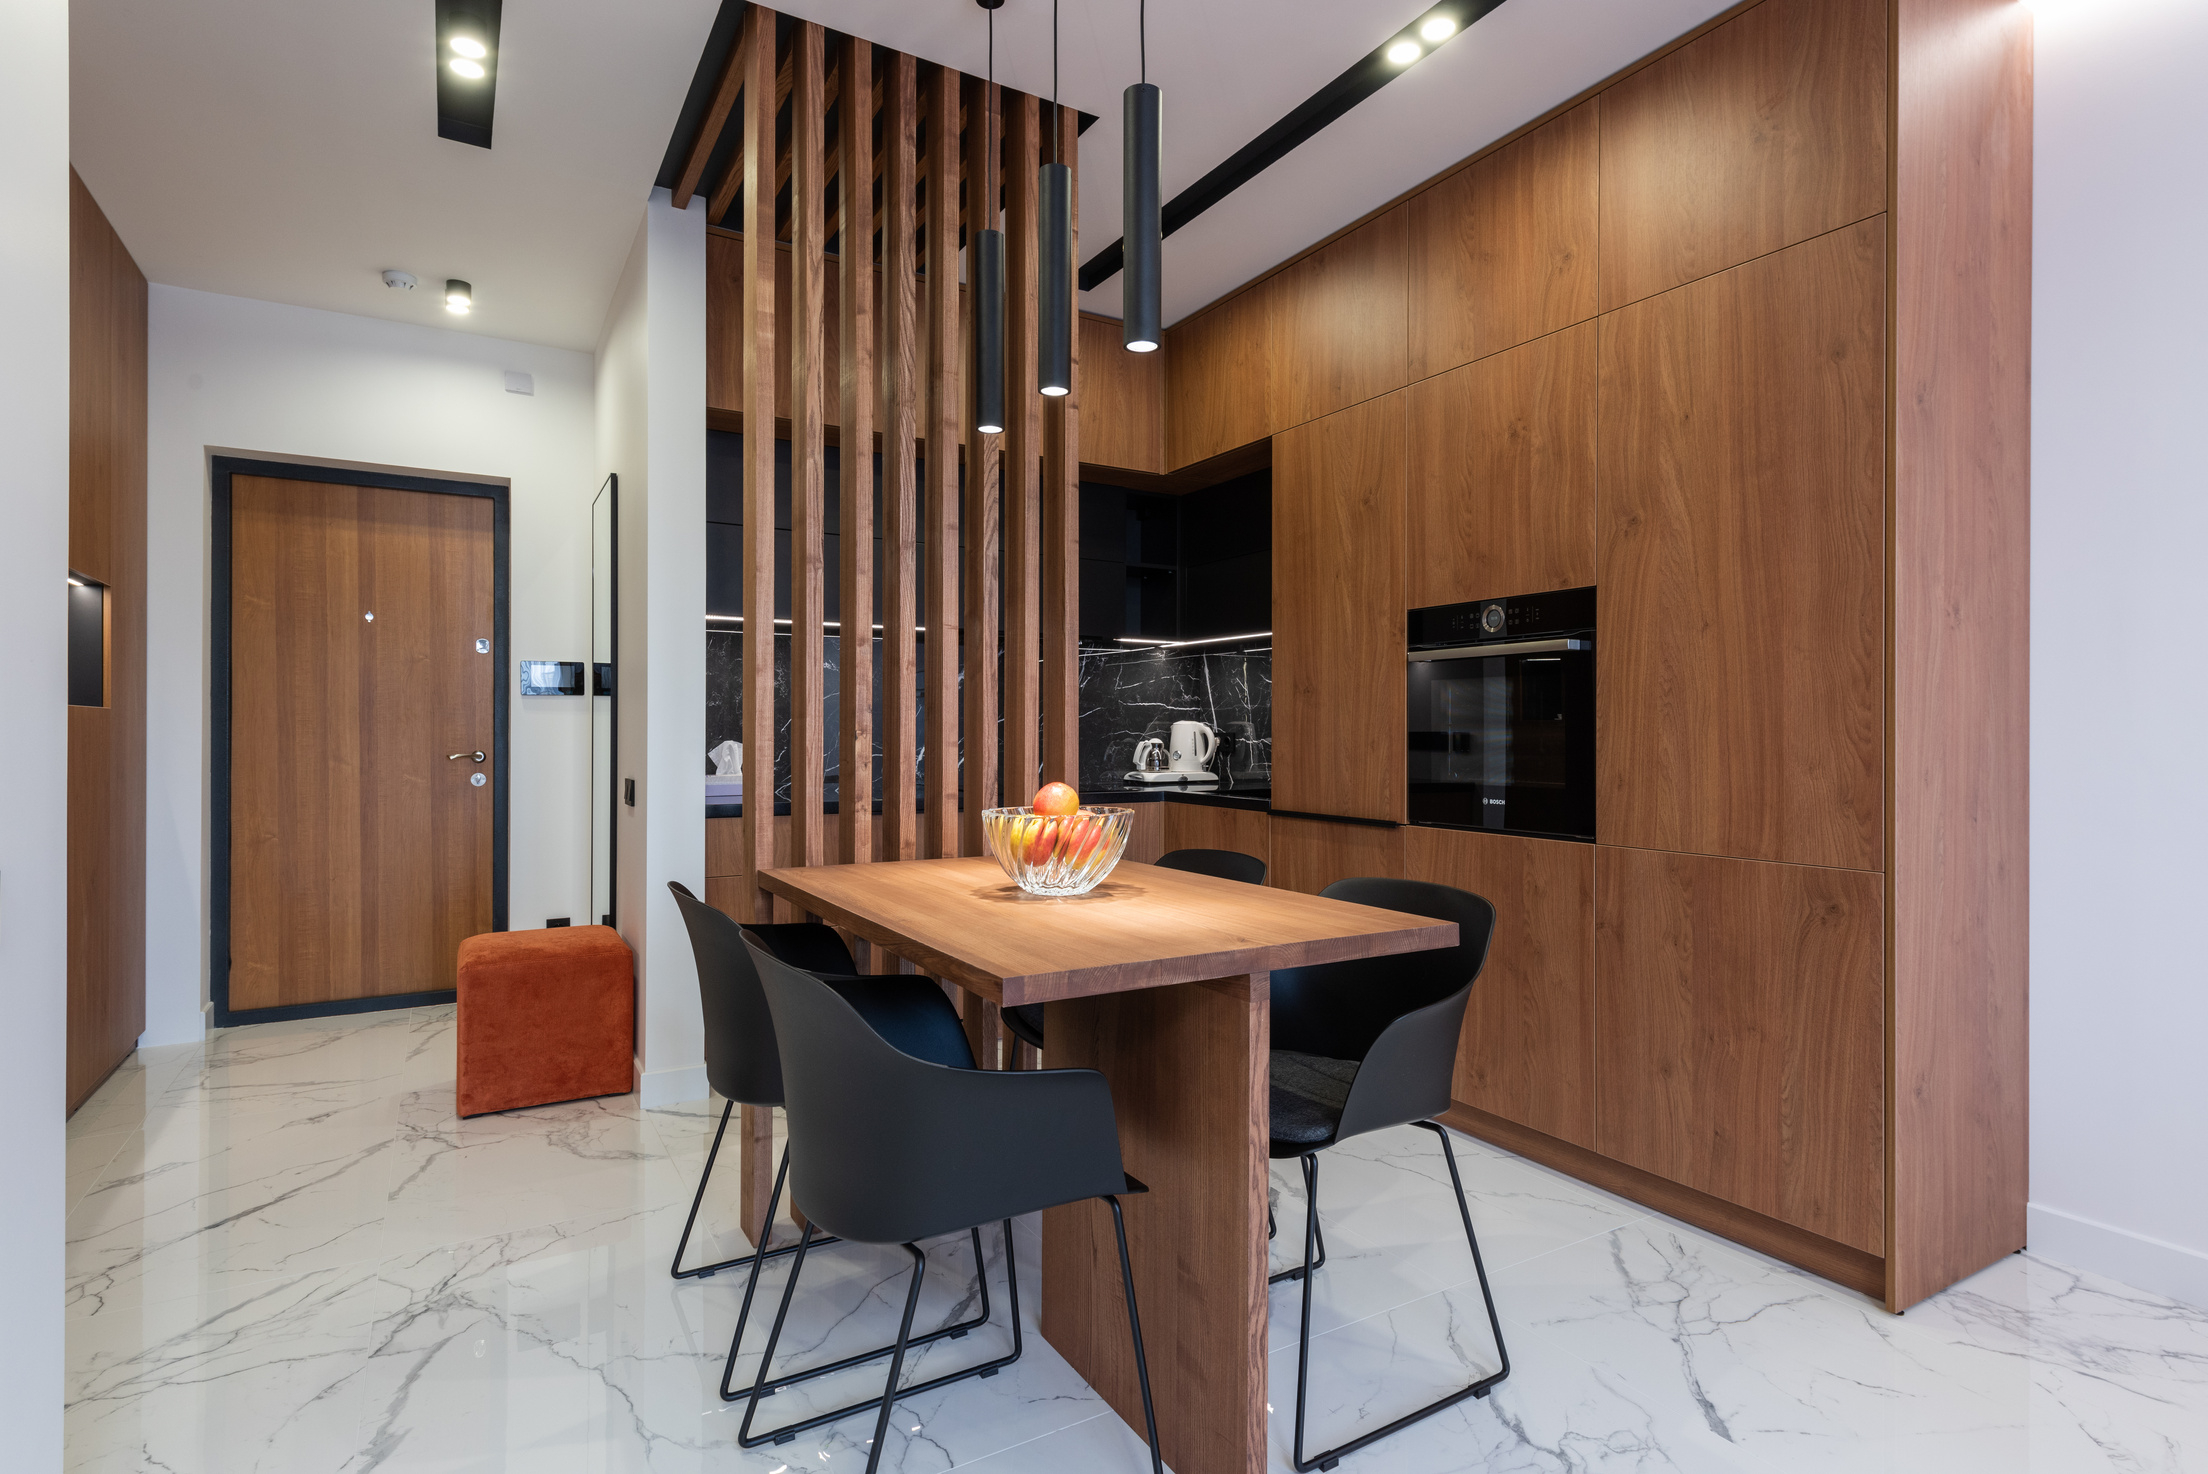 Wooden furniture and table in contemporary kitchen